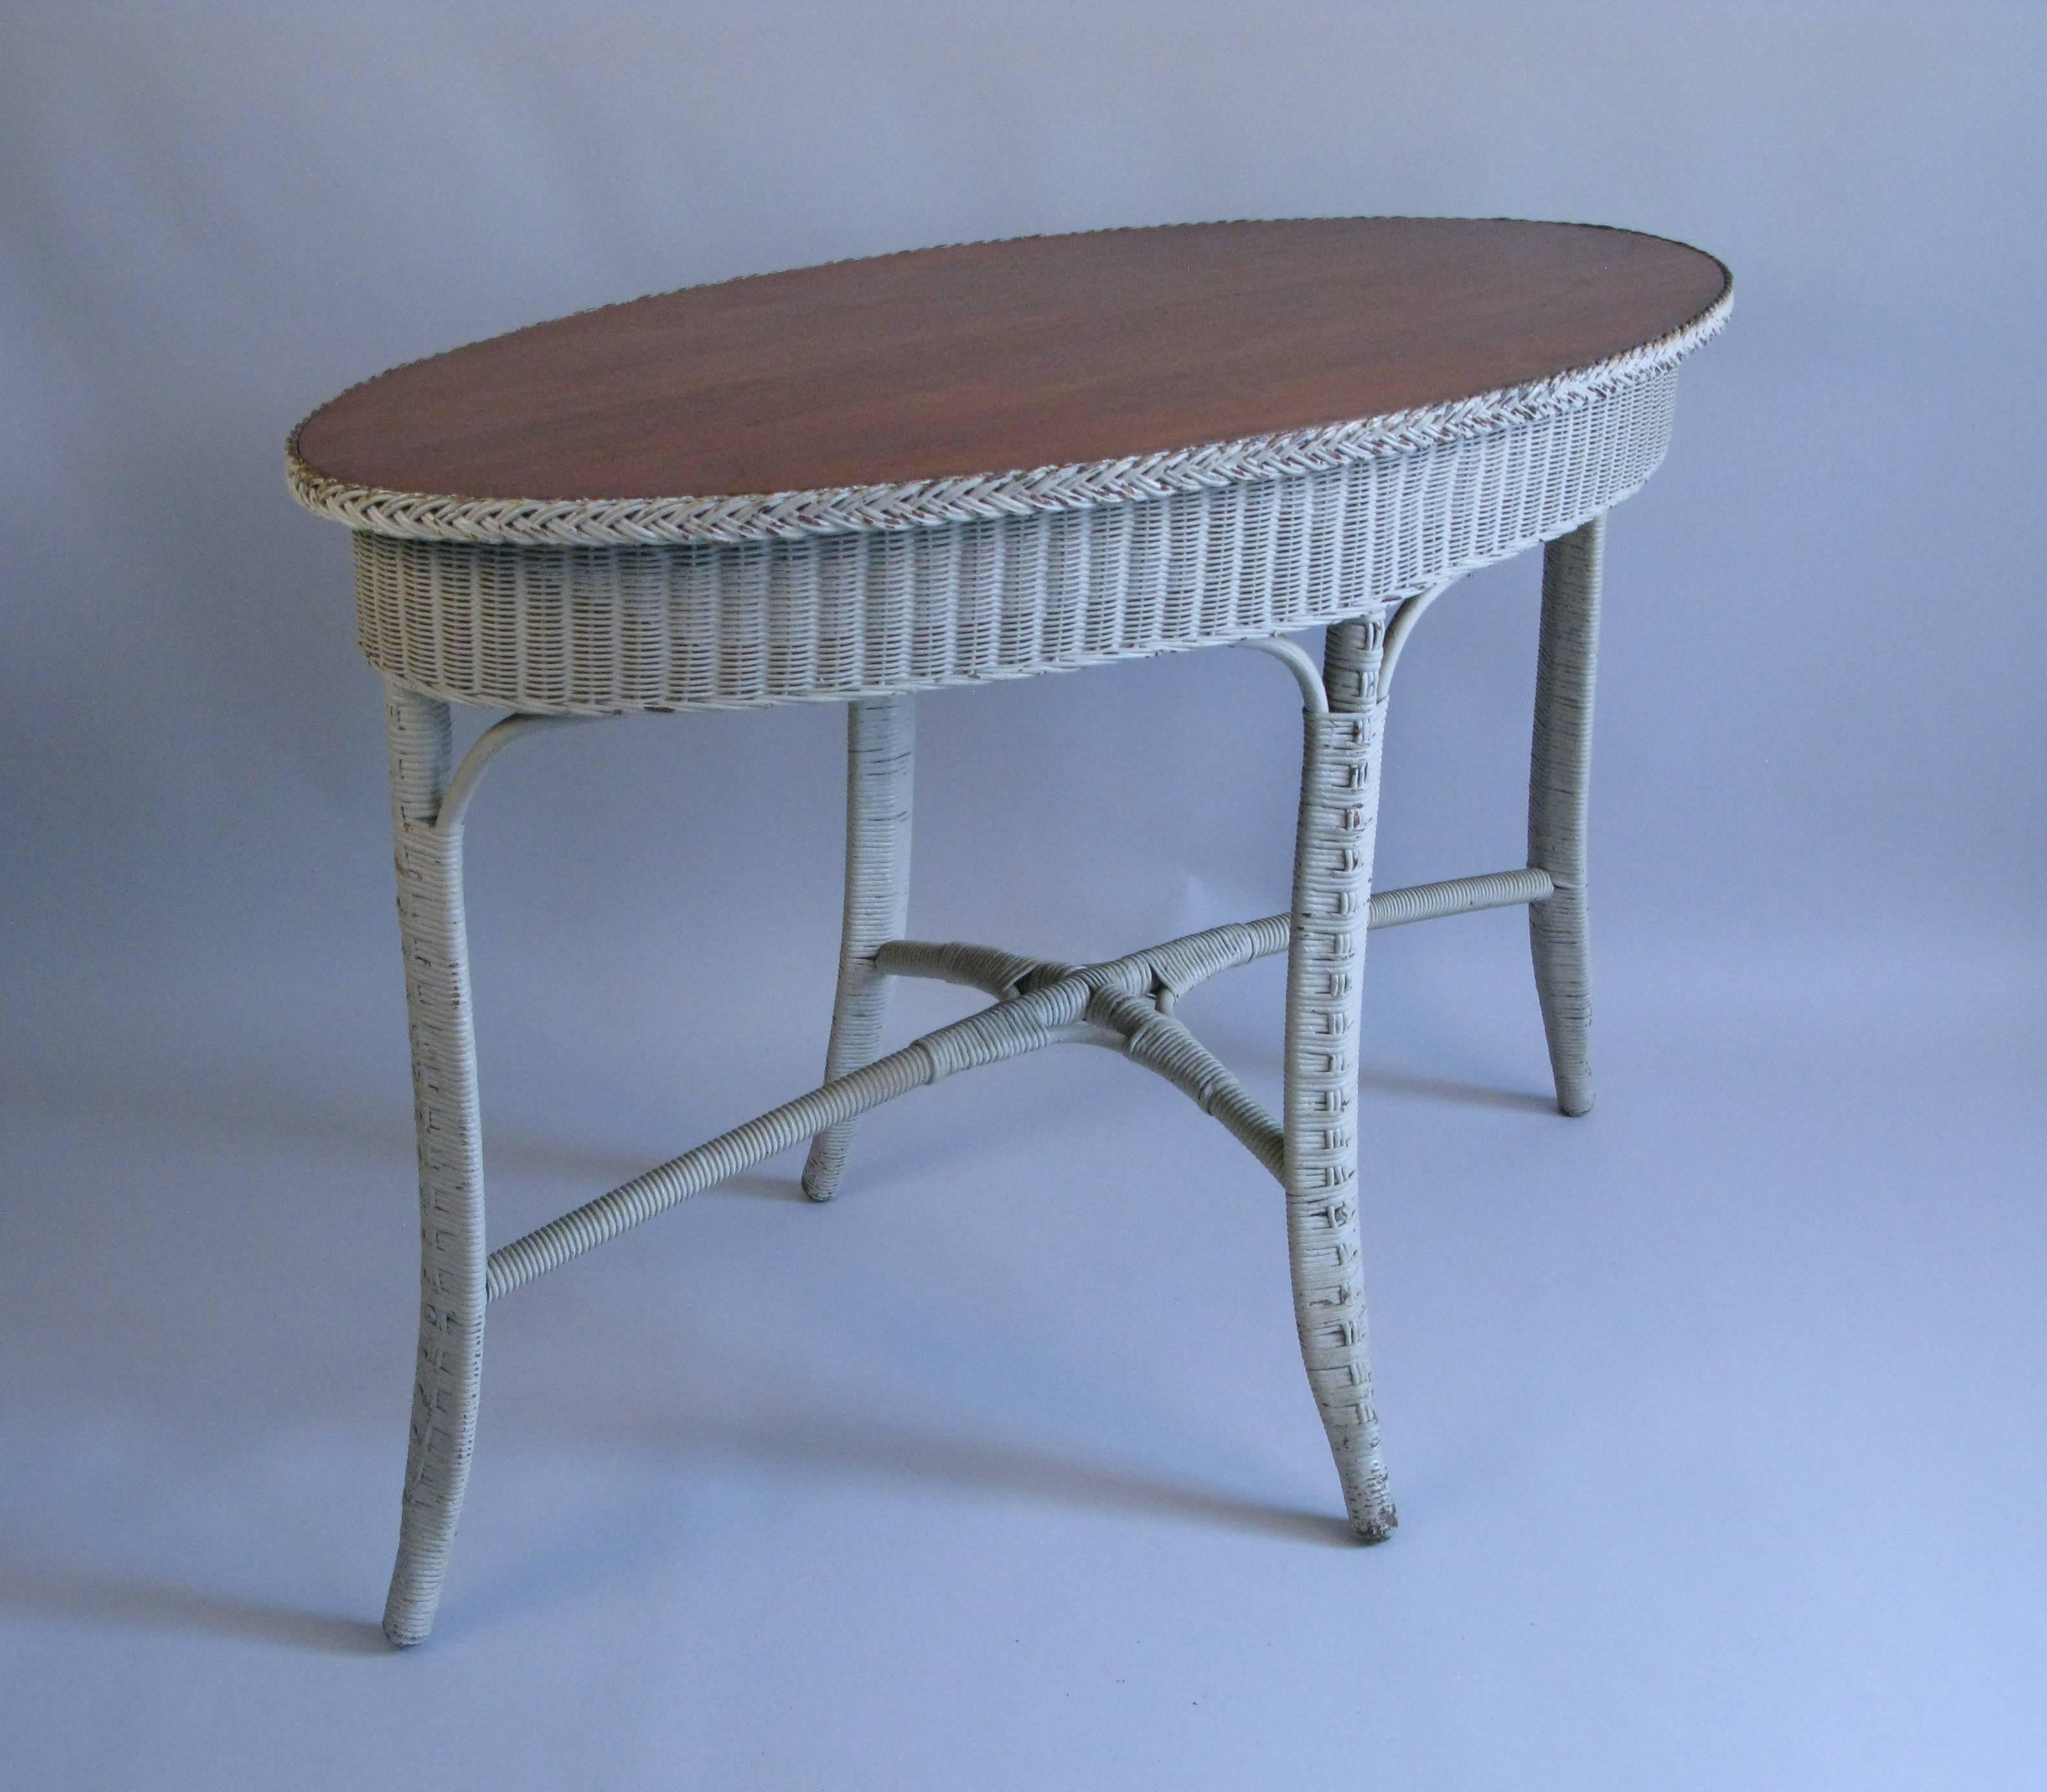 Charming wicker oval center table. Good size and very good condition.
There is a painted over Heywood Wakefield label.